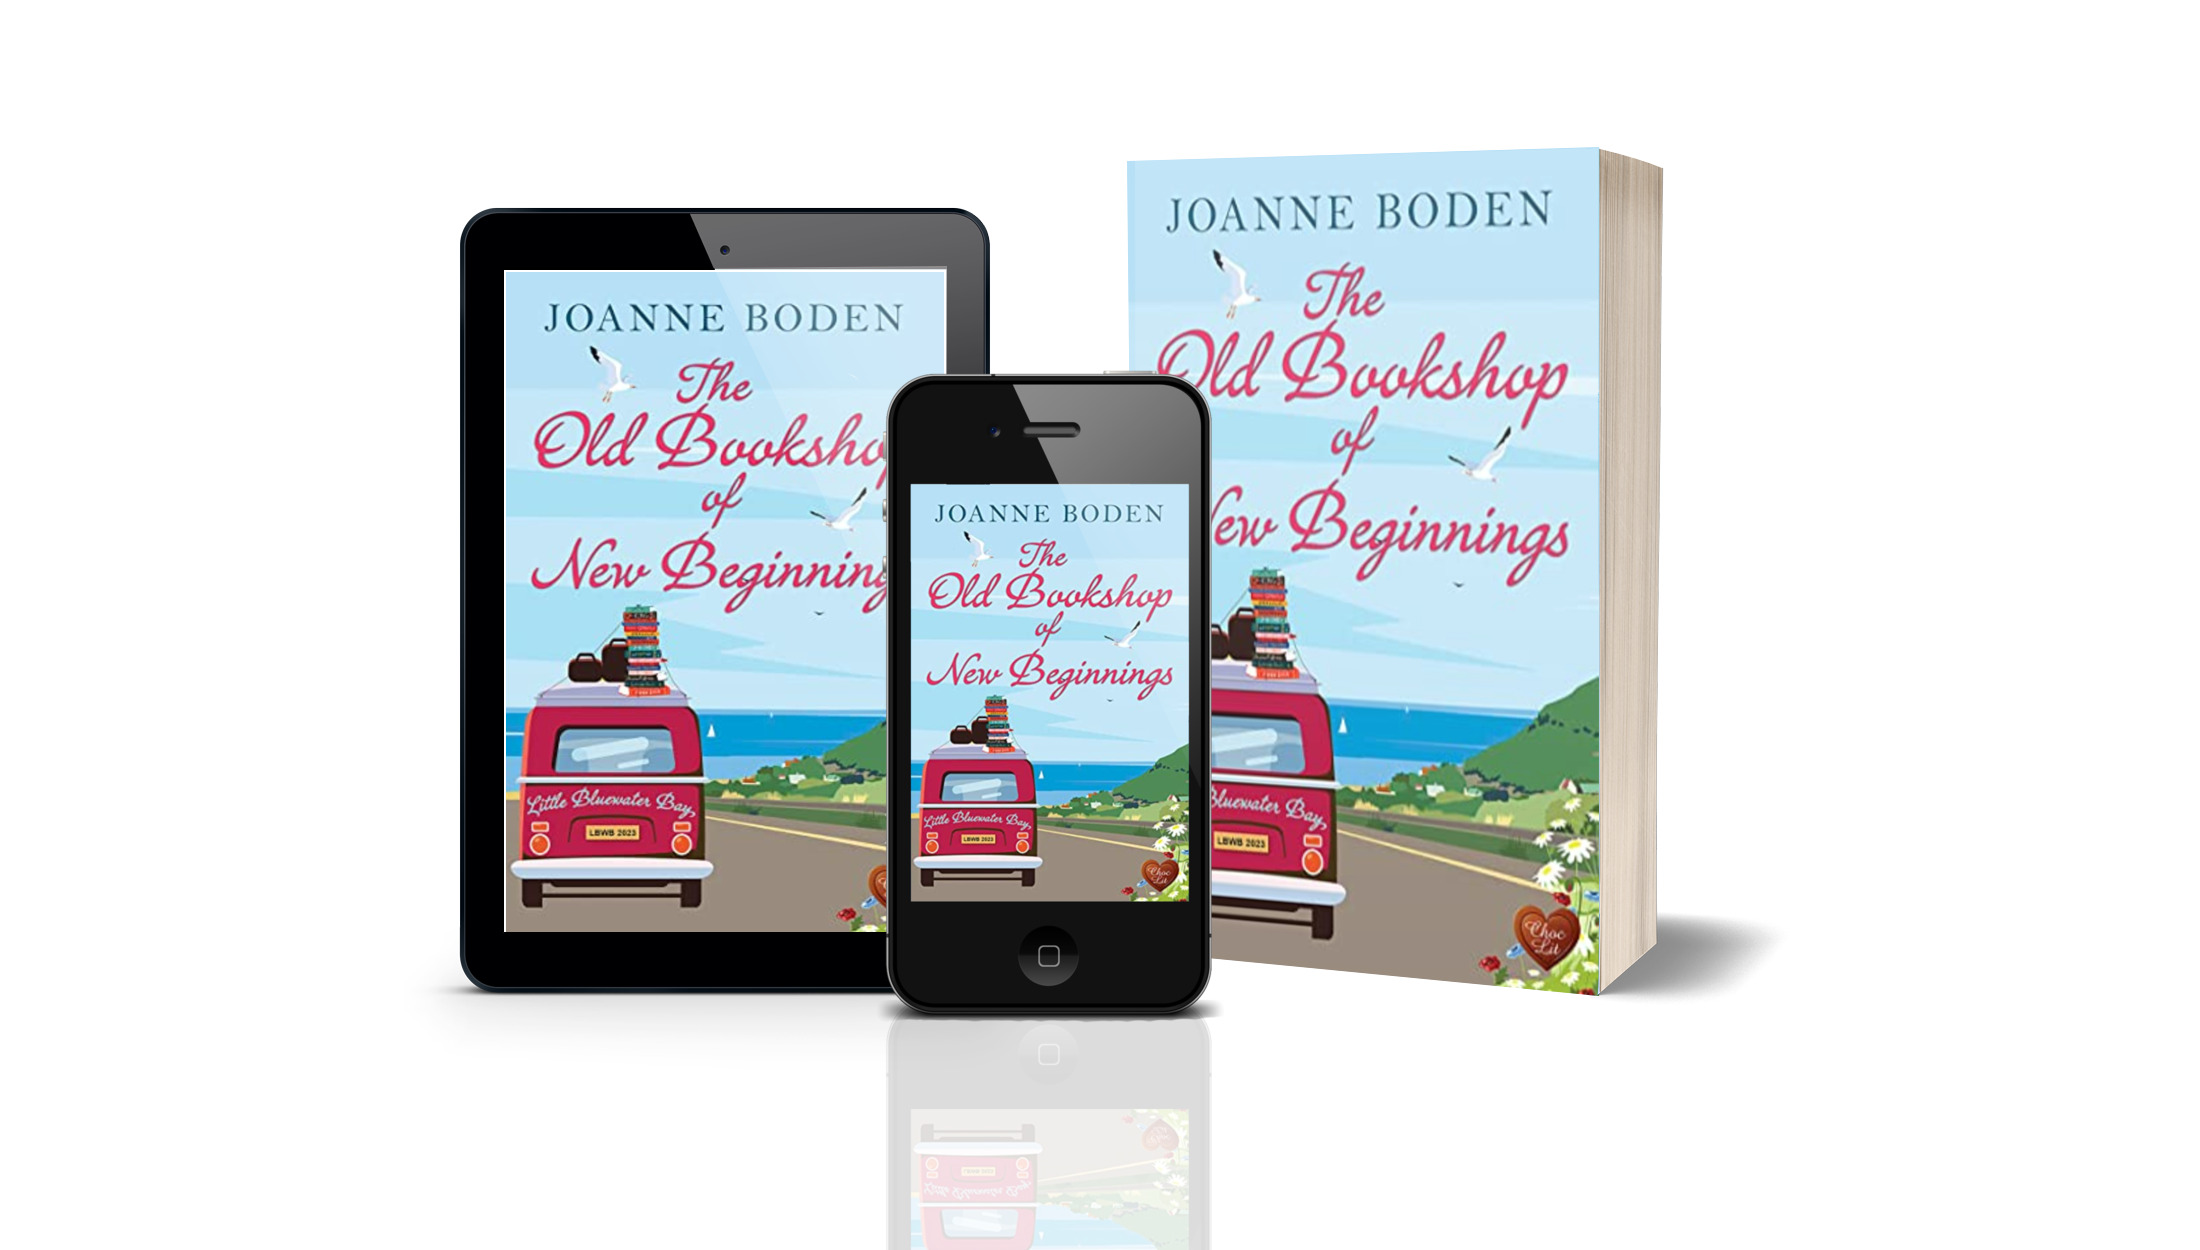 Joanne Boden – The Old Bookshop of New Beginnings